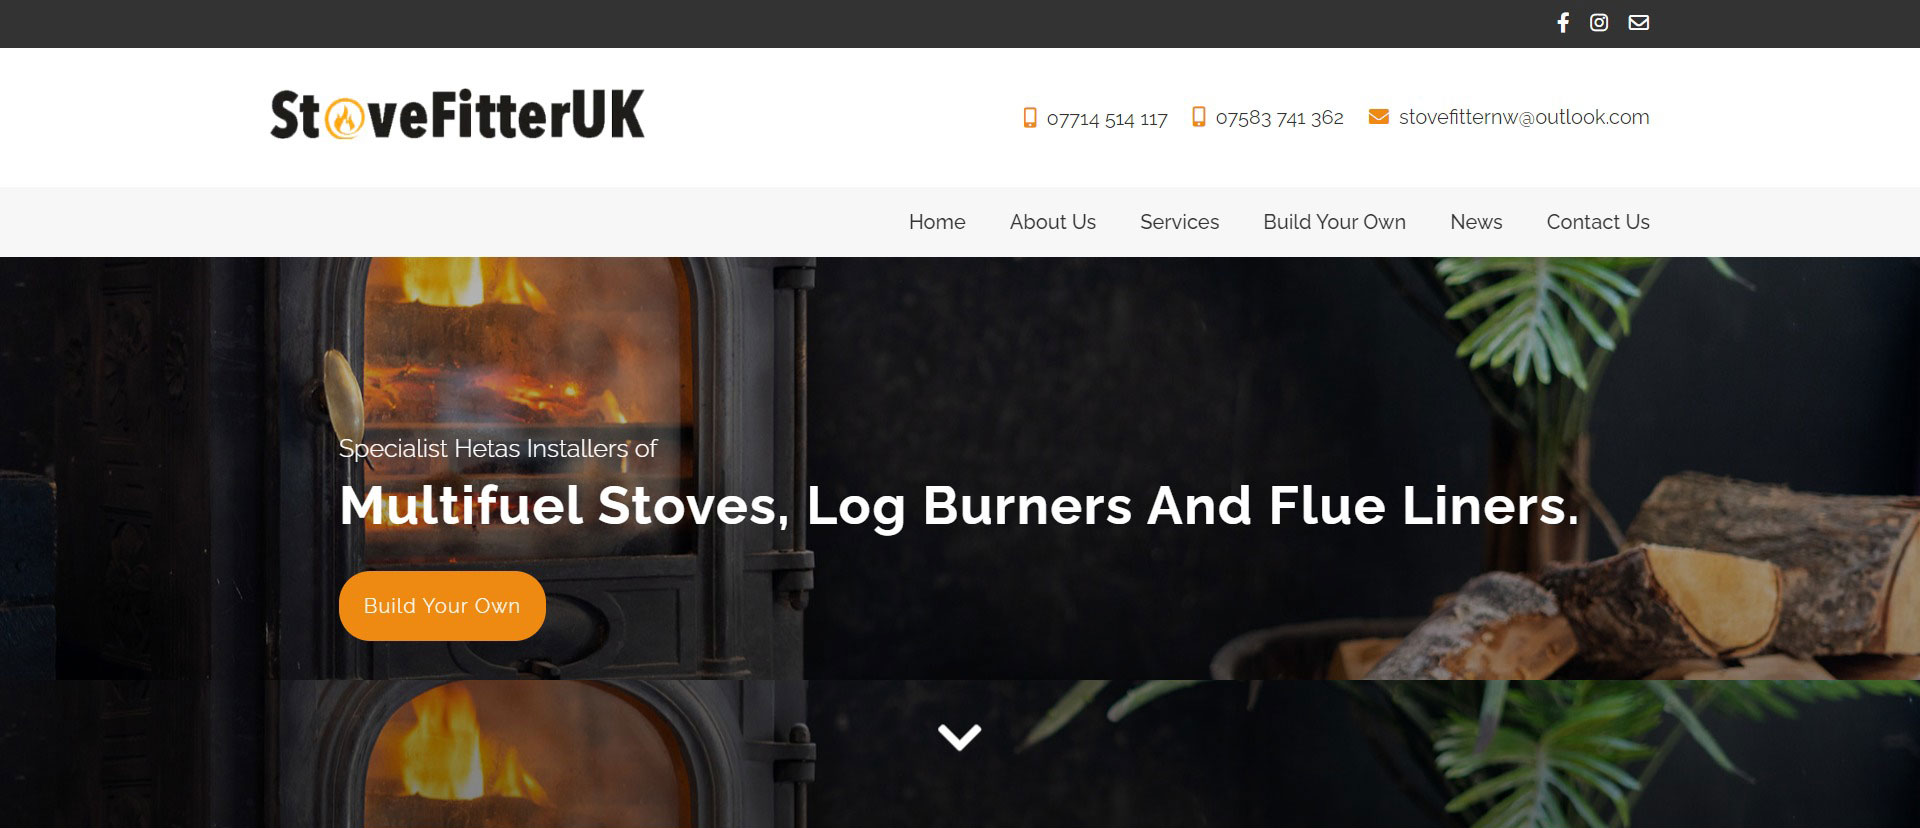 Stove Fitter UK Installers of Multifuel Stoves and Log Burners